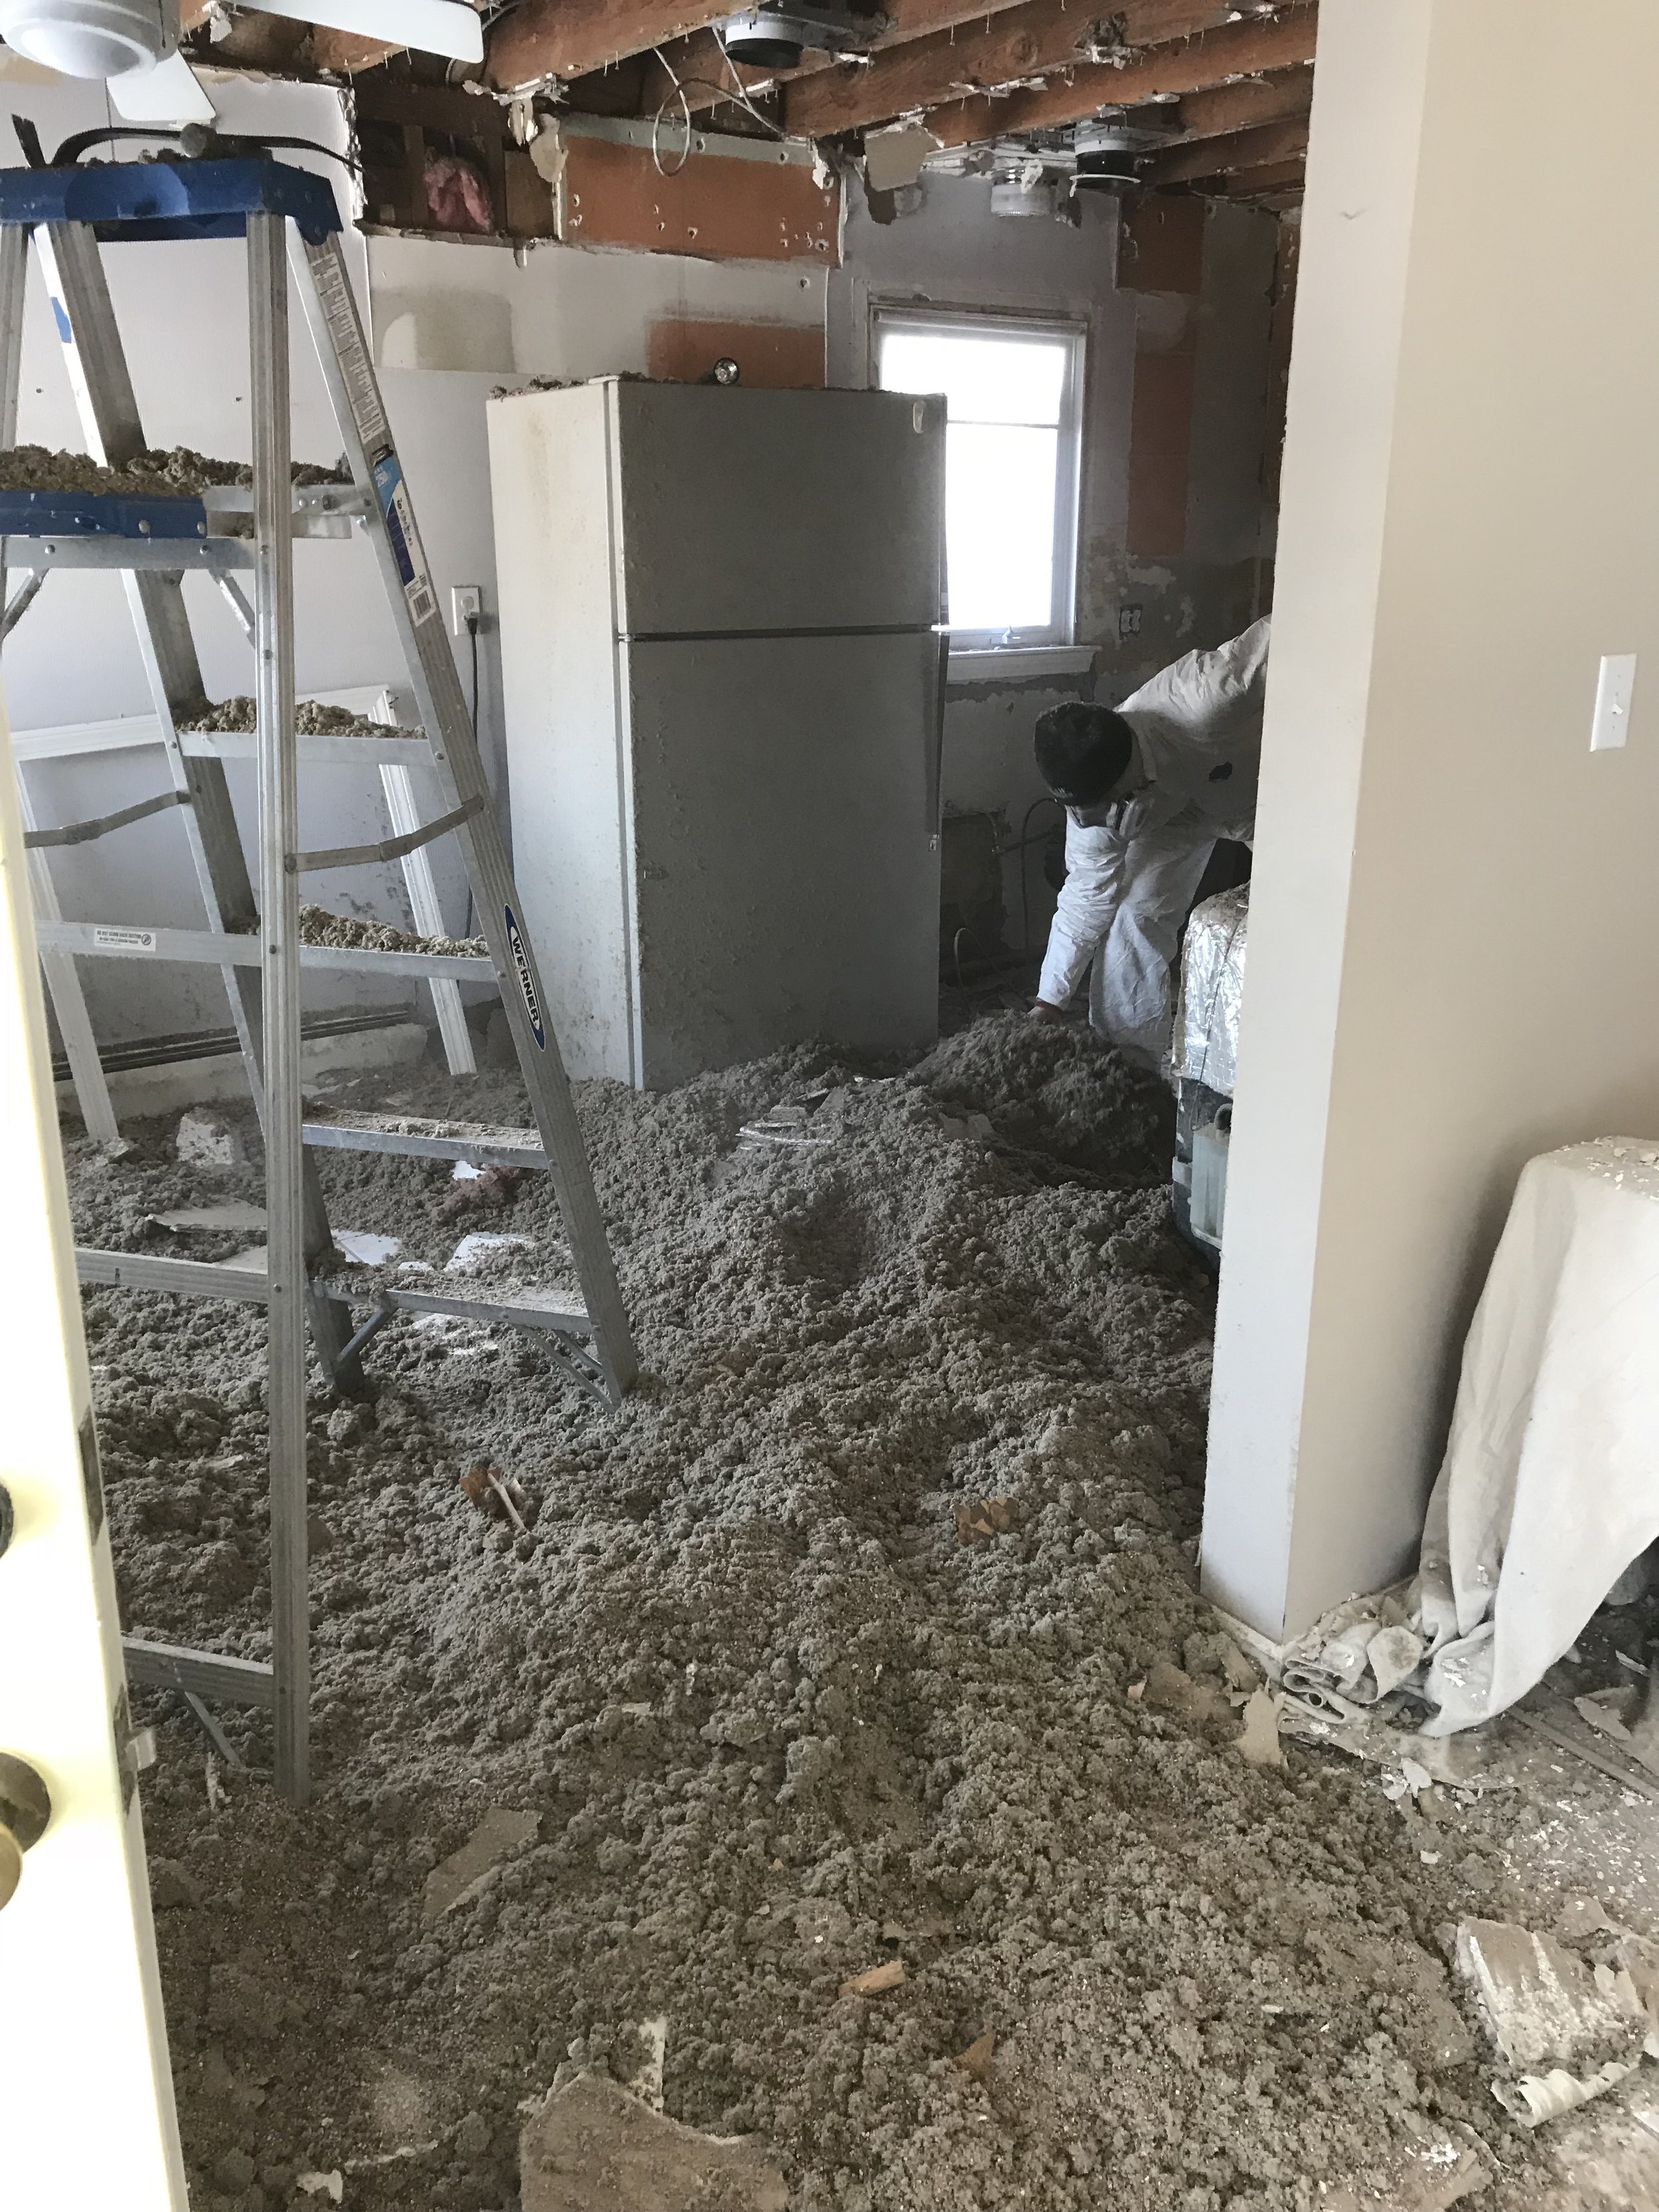  This first floor remodel includes kitchen, living room, and bathroom renovations. The overall project includes demo, framing, installing new insulation, drywall, priming/painting, installing new floors and doors, brand new cabinets and countertops, 